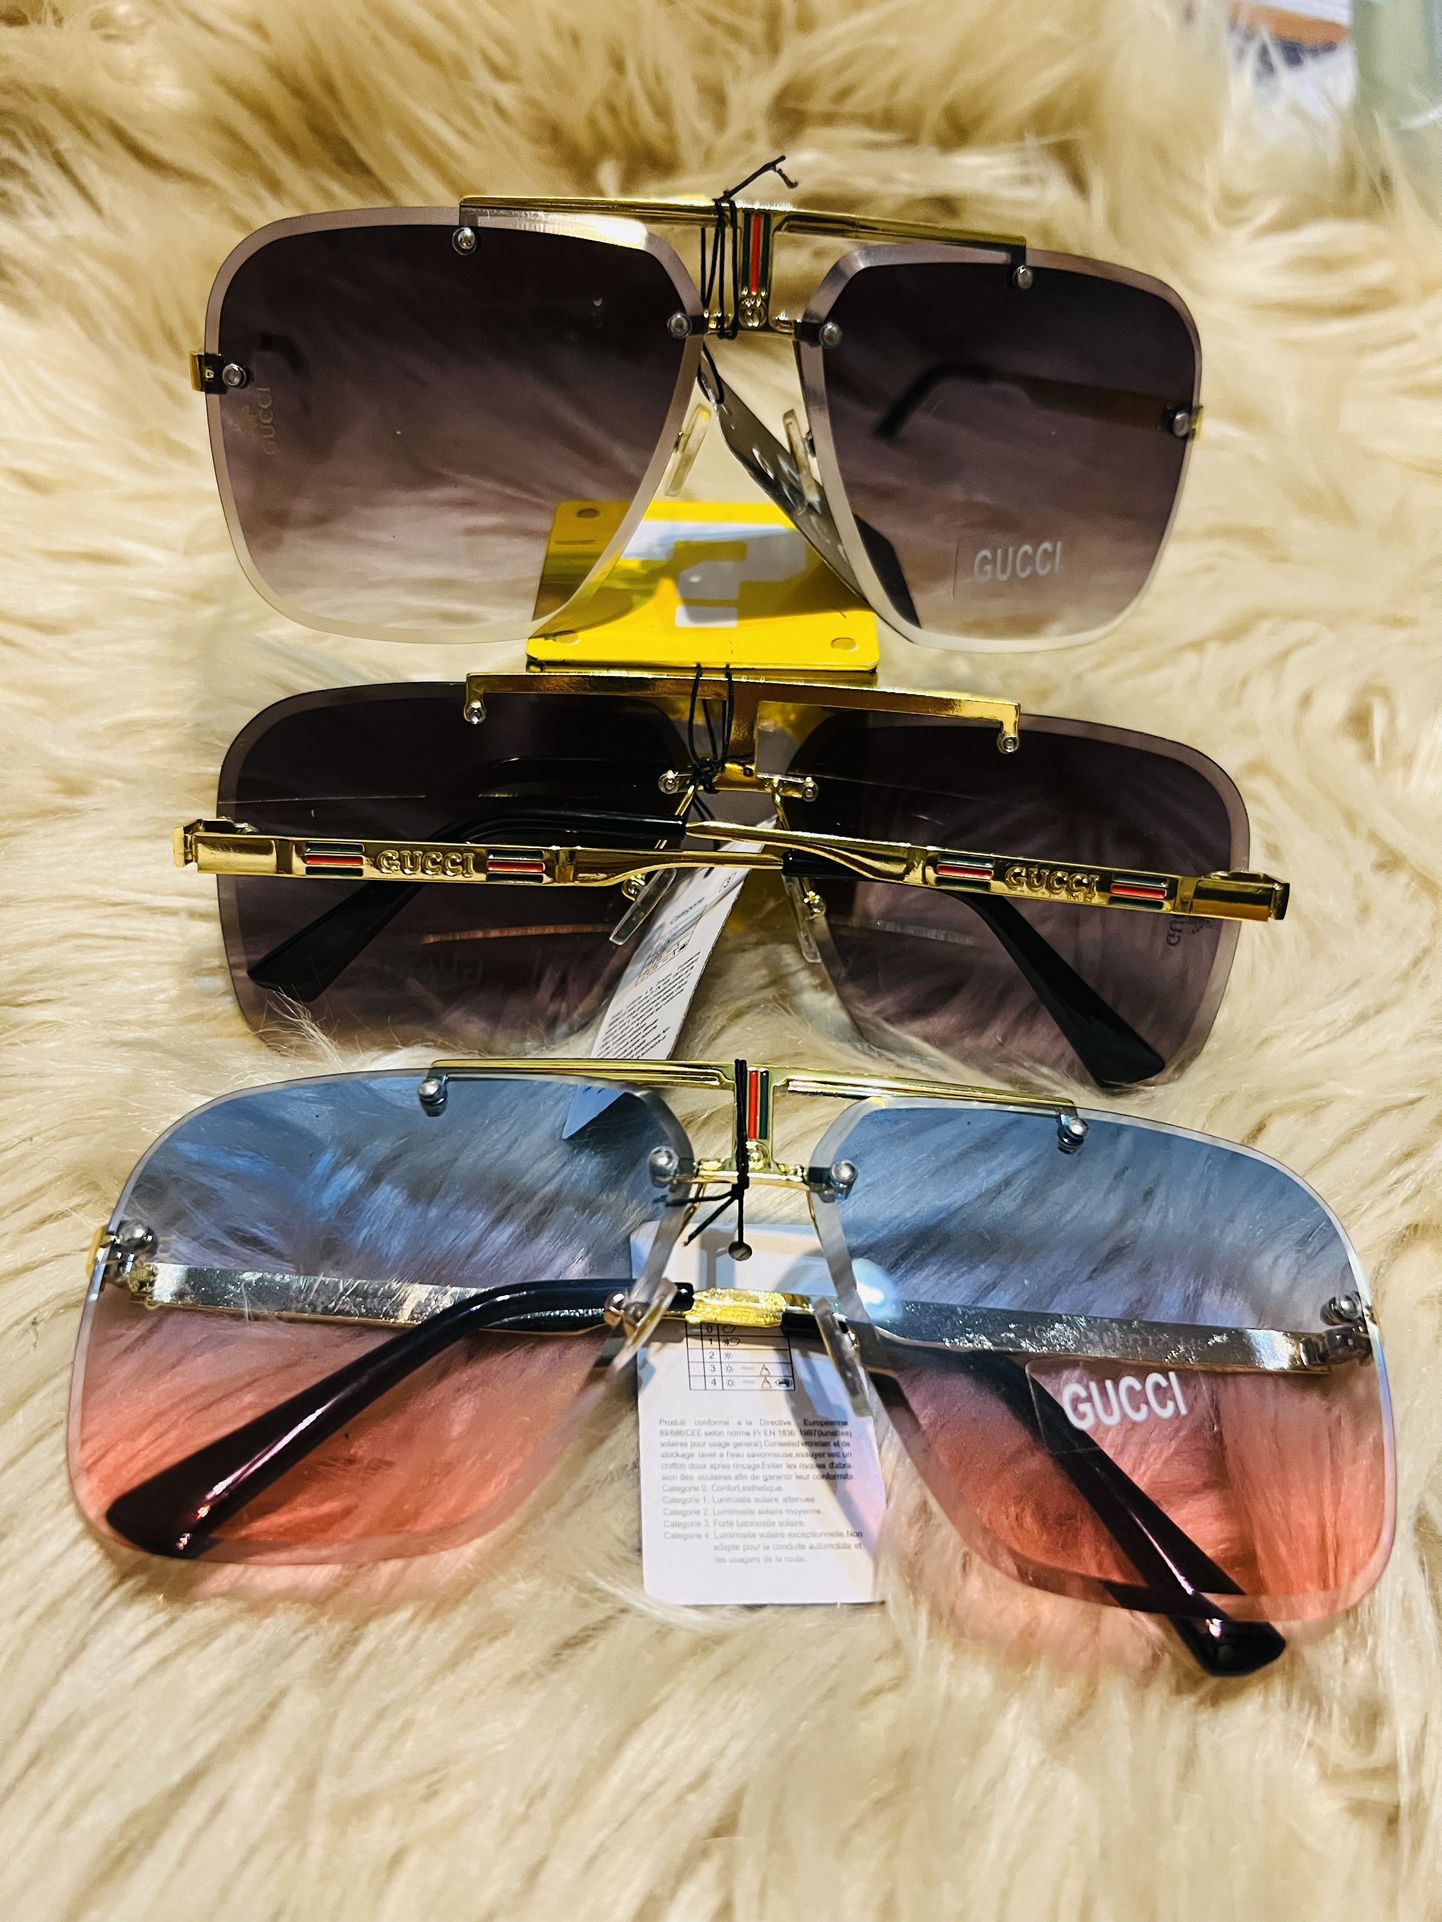 Sunglasses All Brand Available Very Good Quality for Sale in Clinton, MD -  OfferUp